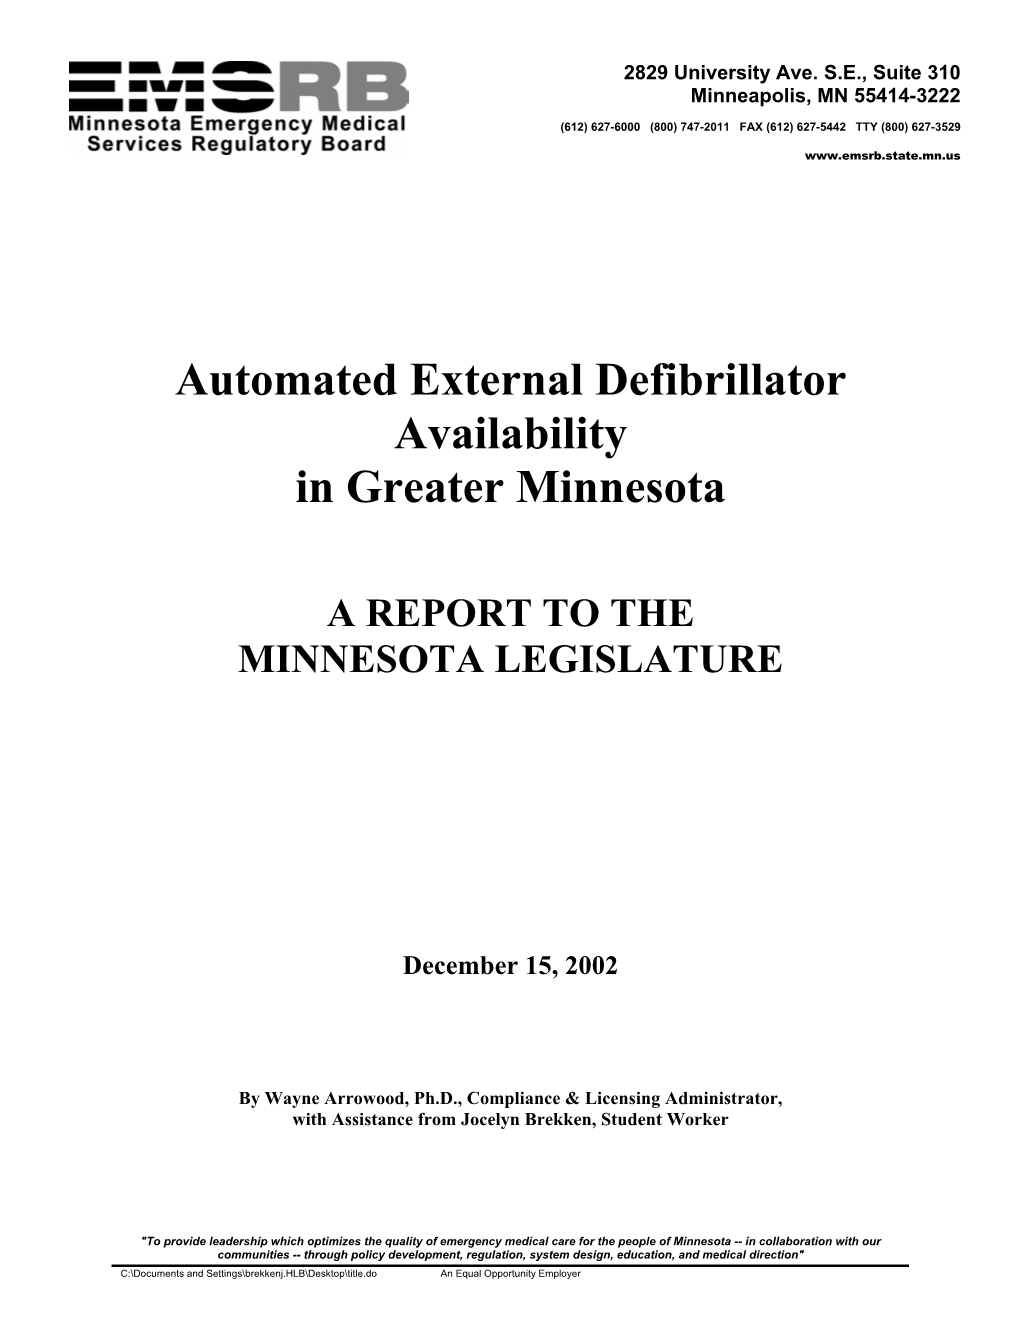 Automated External Defibrillator Availability in Greater Minnesota